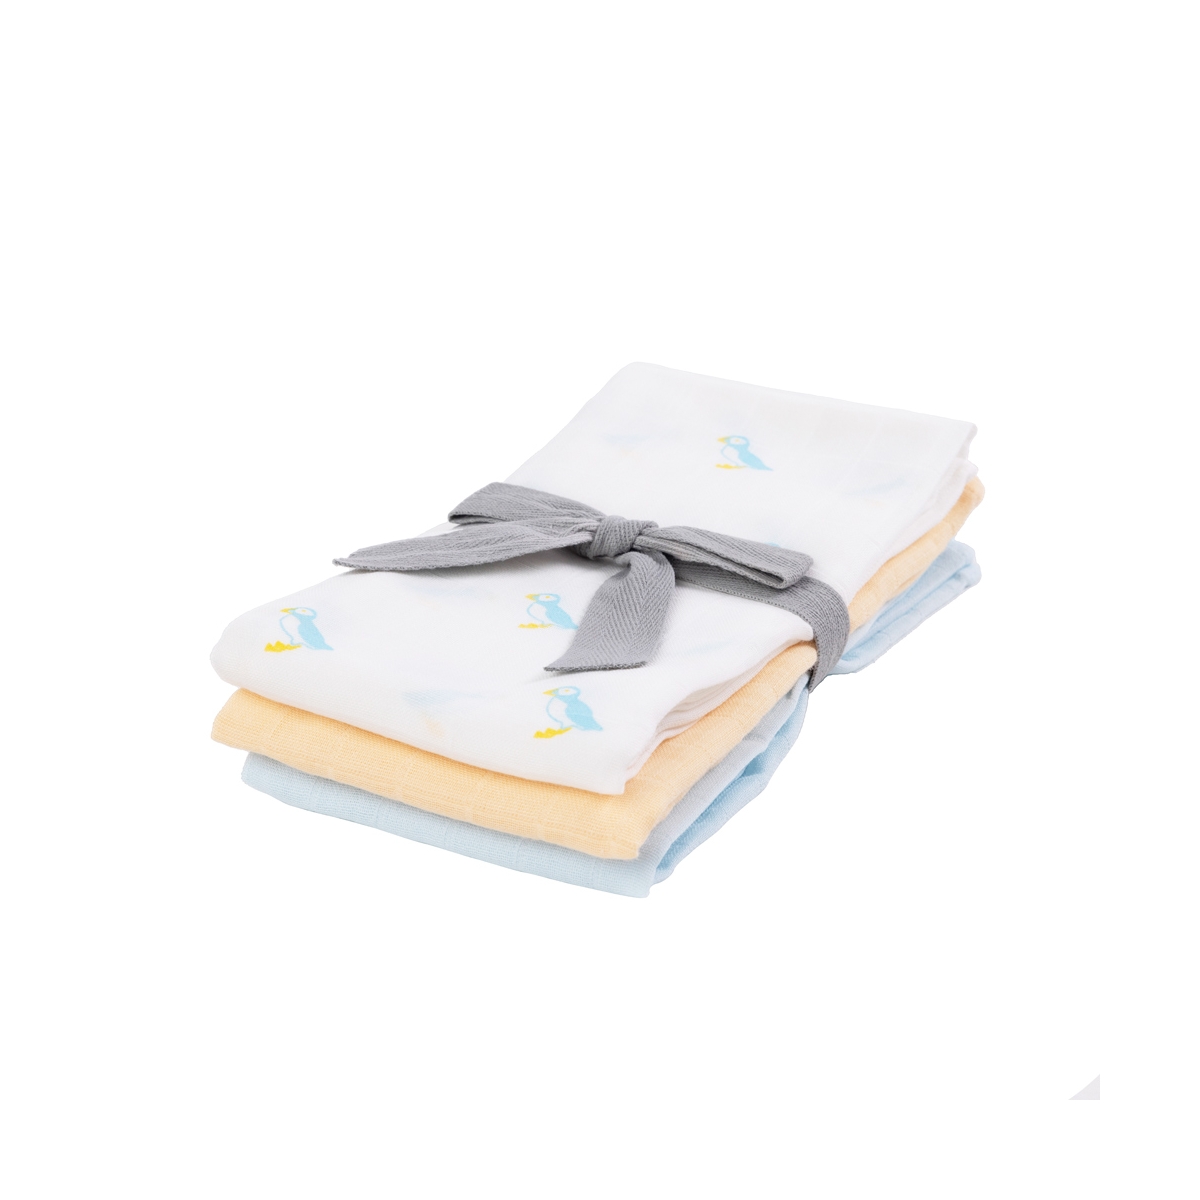 Kiki & Sebby 100% Cotton Pack of 3 Muslin Swaddle Blankets – Puffin/Yellow/Blue